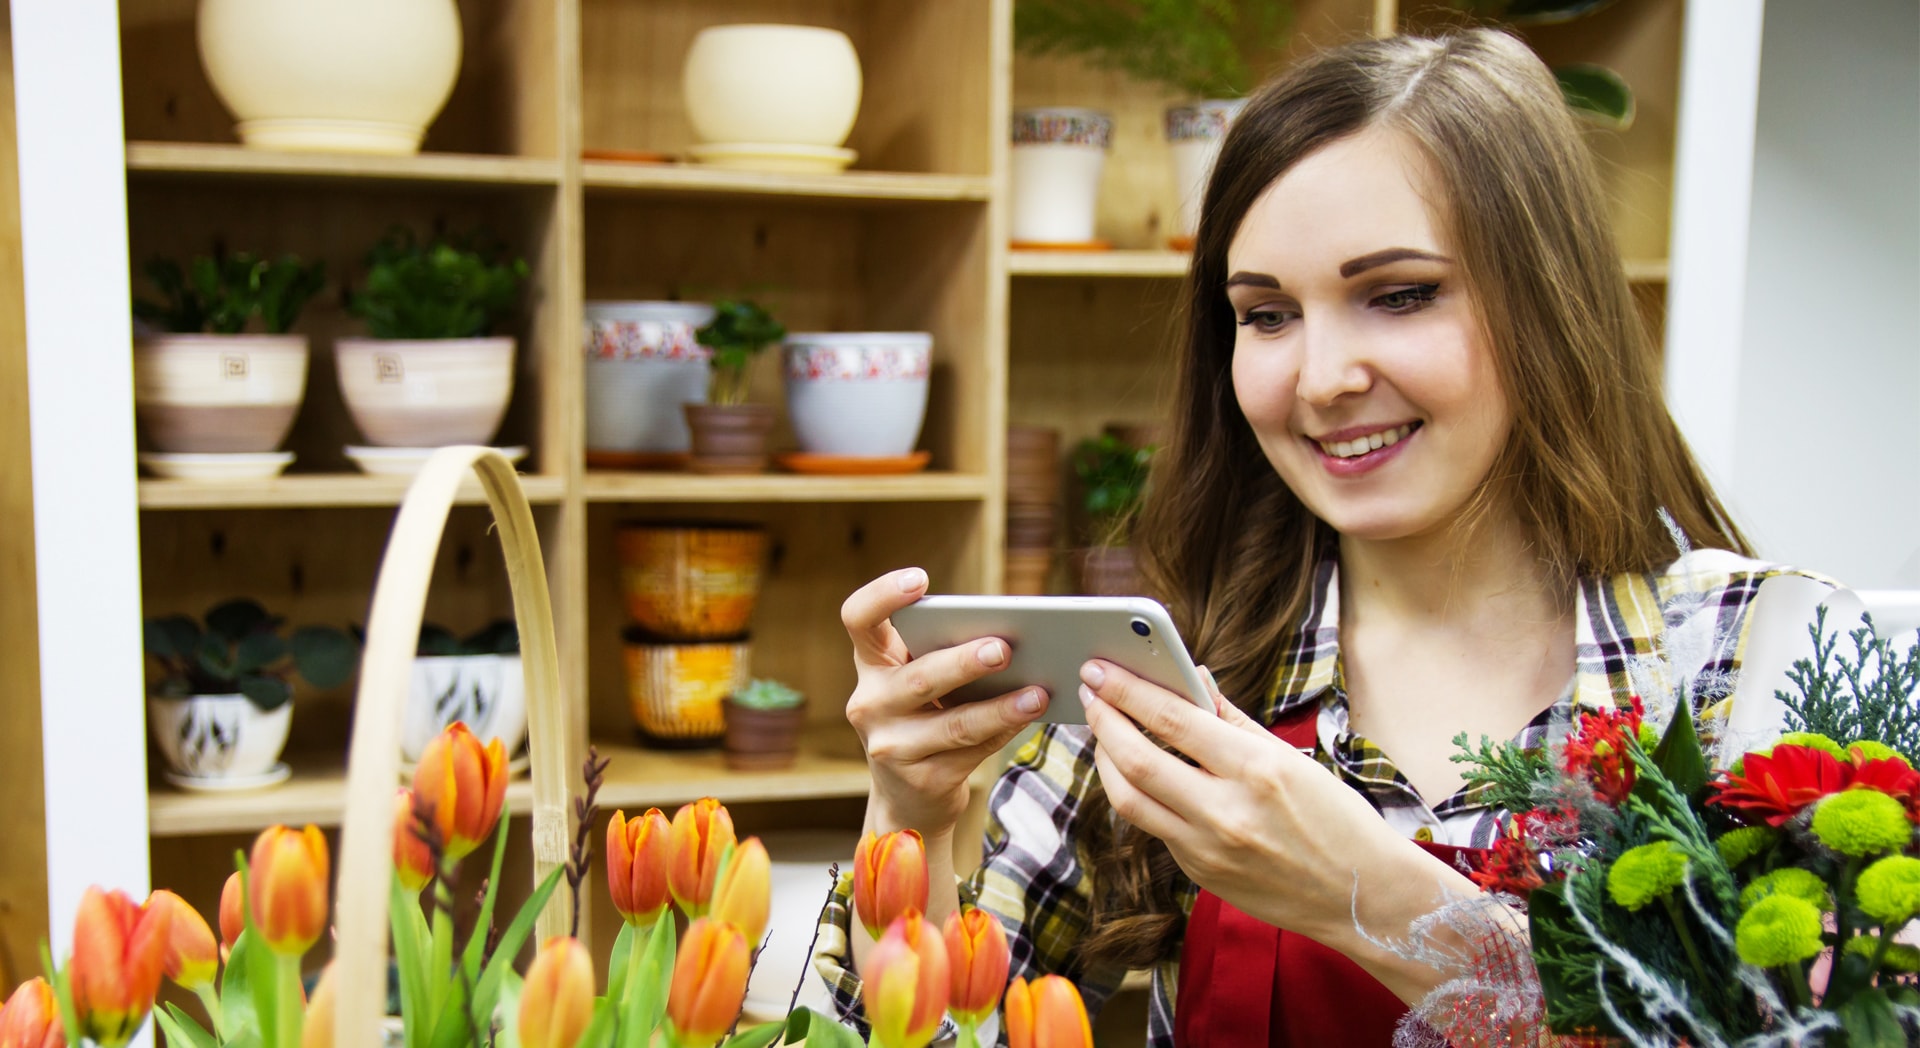 A florist smiles as she uses her phone to take photos of her flower arrangements.